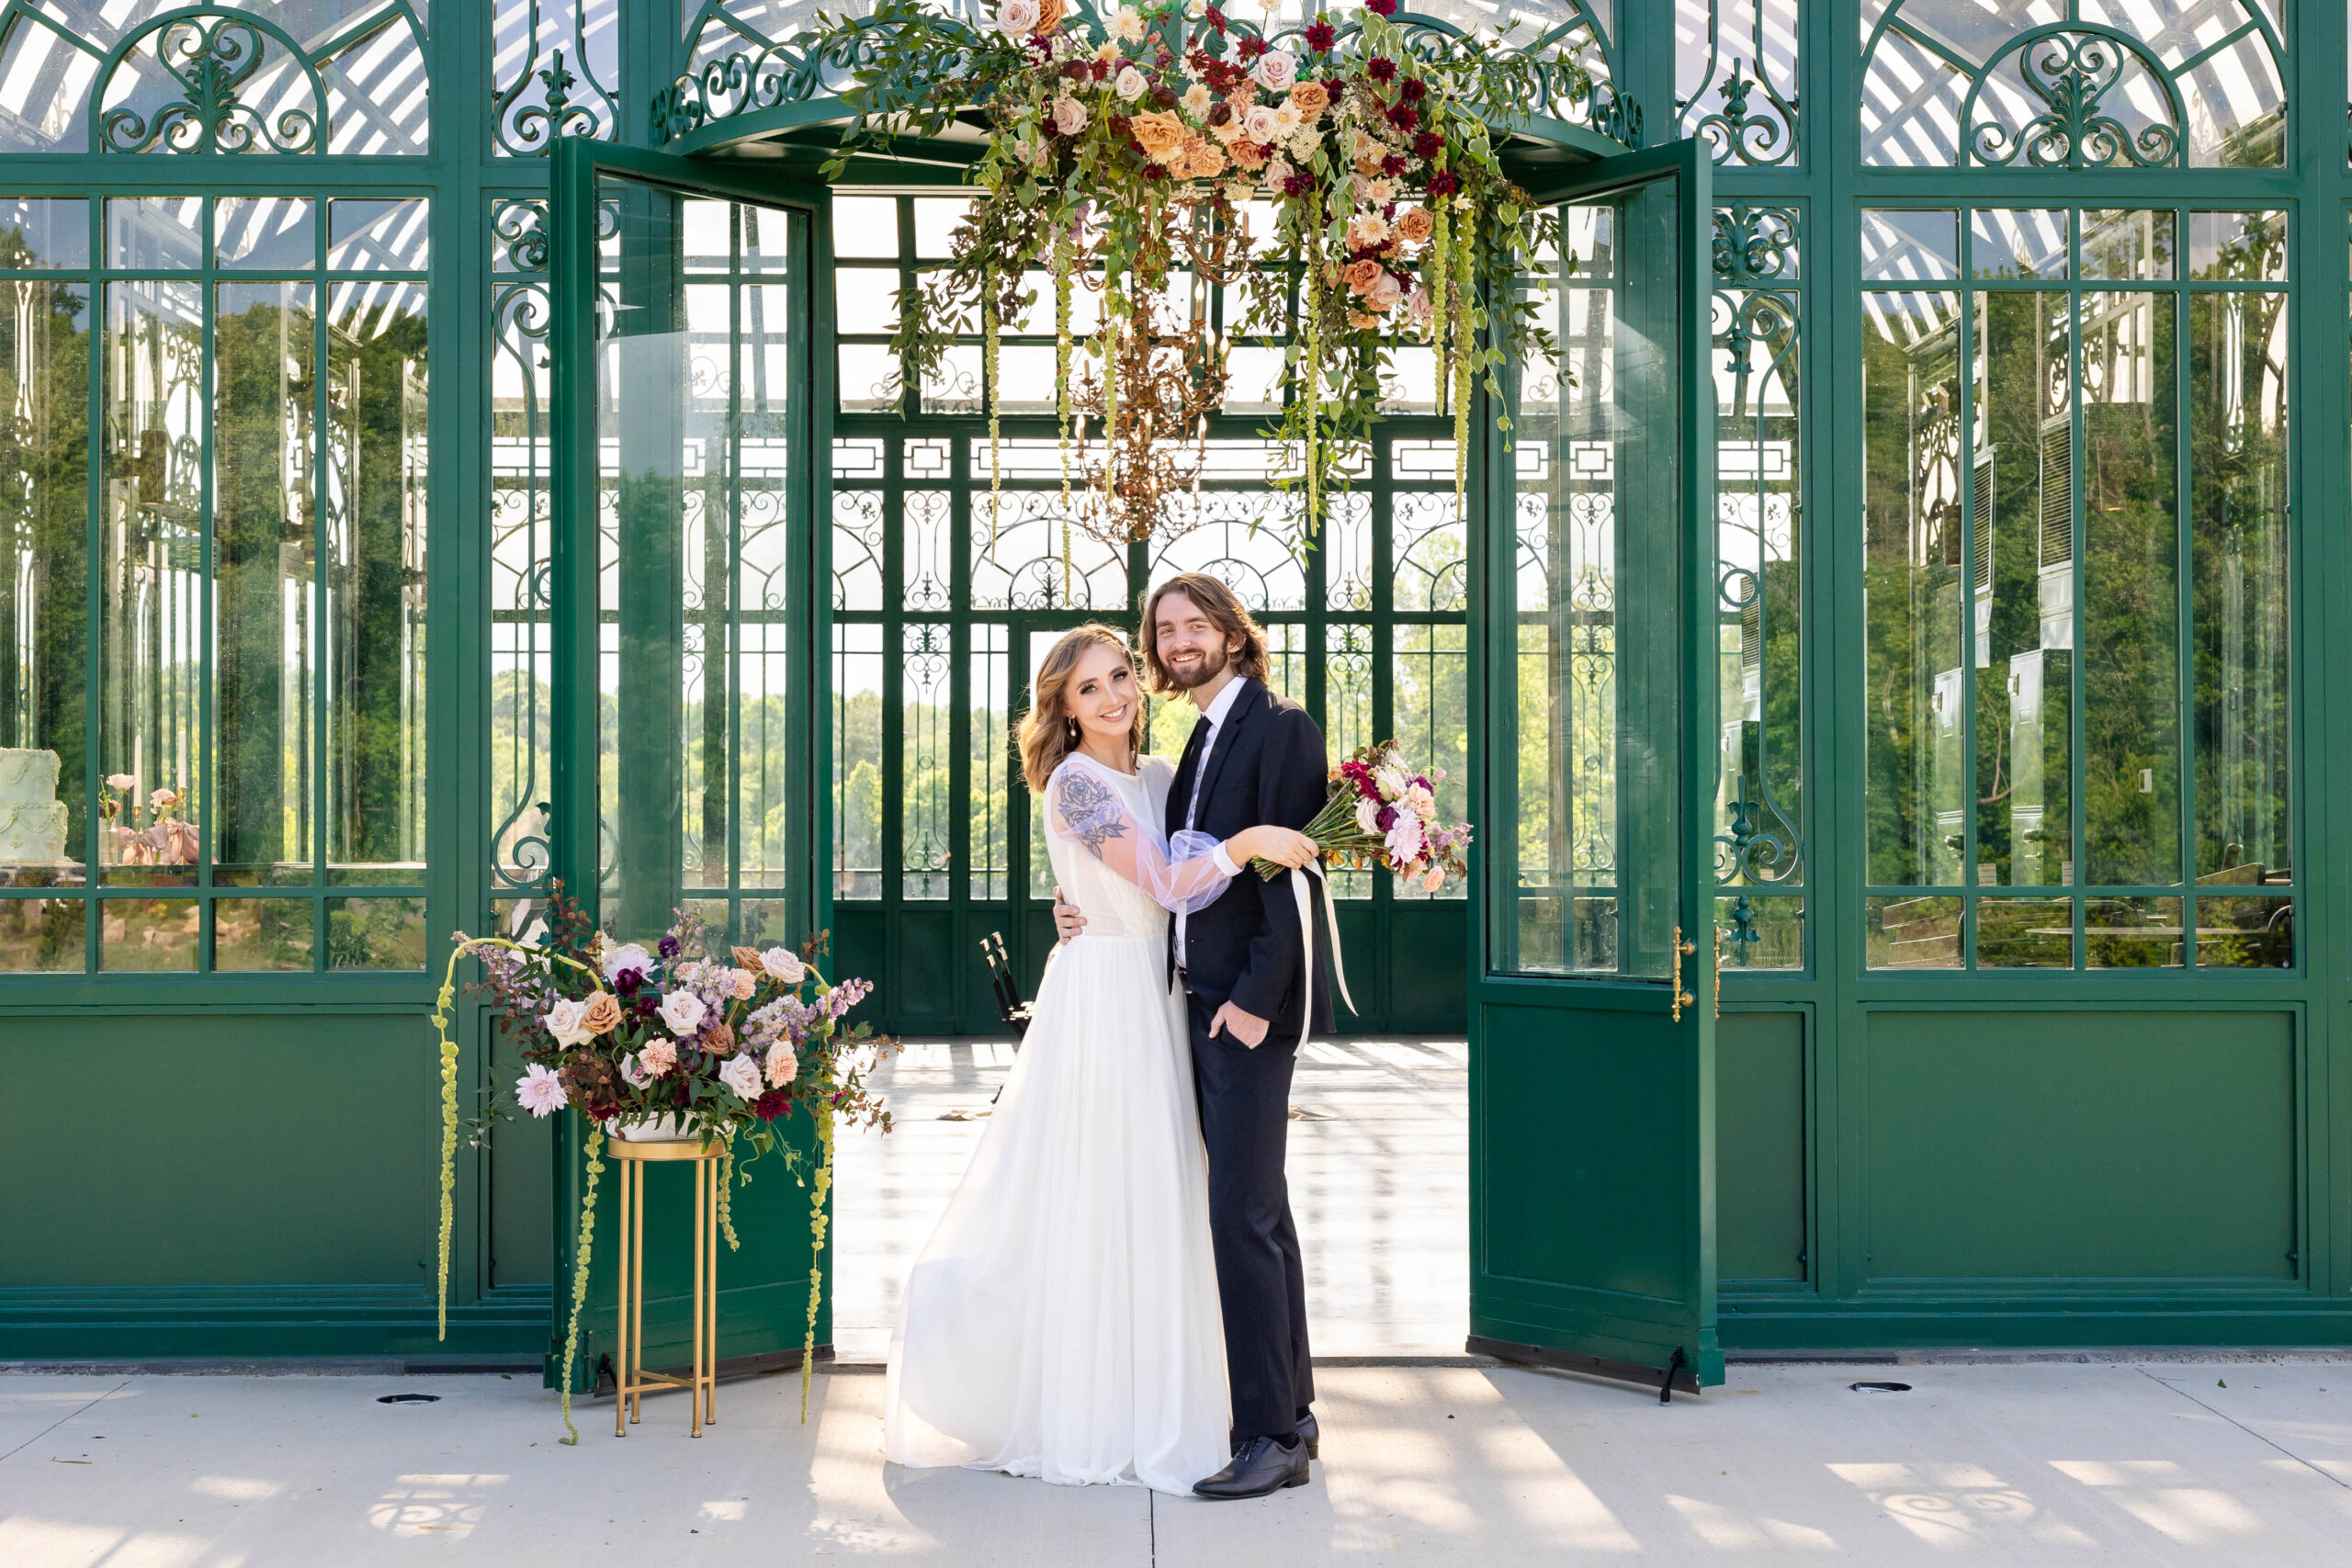 Bride and groom with florals framing the green atrium where the wedding reception was held. Bride and groom in a belly button to belly button embrace. Both facing the camera and smiling.